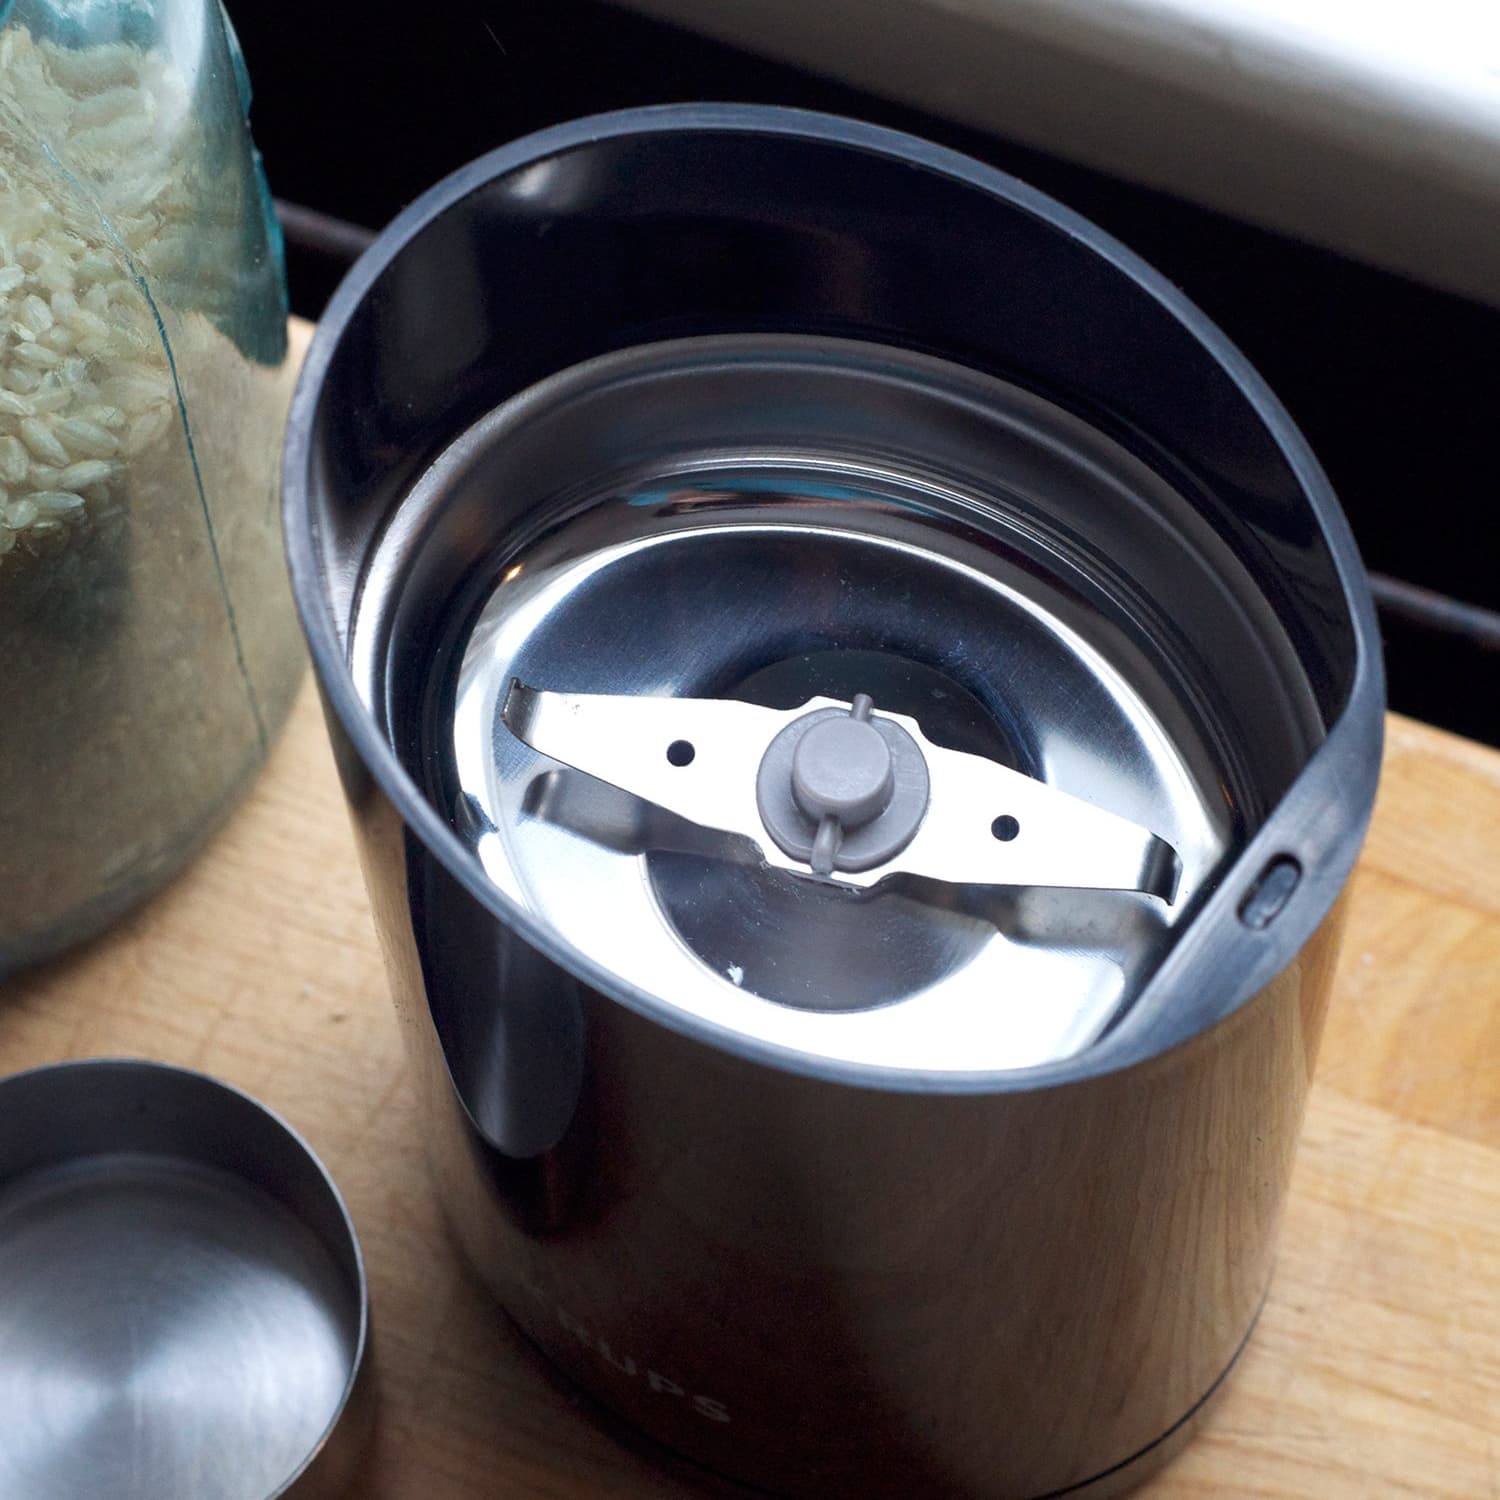 Coffee Grinder vs. Spice Grinder: Is There Any Real Difference